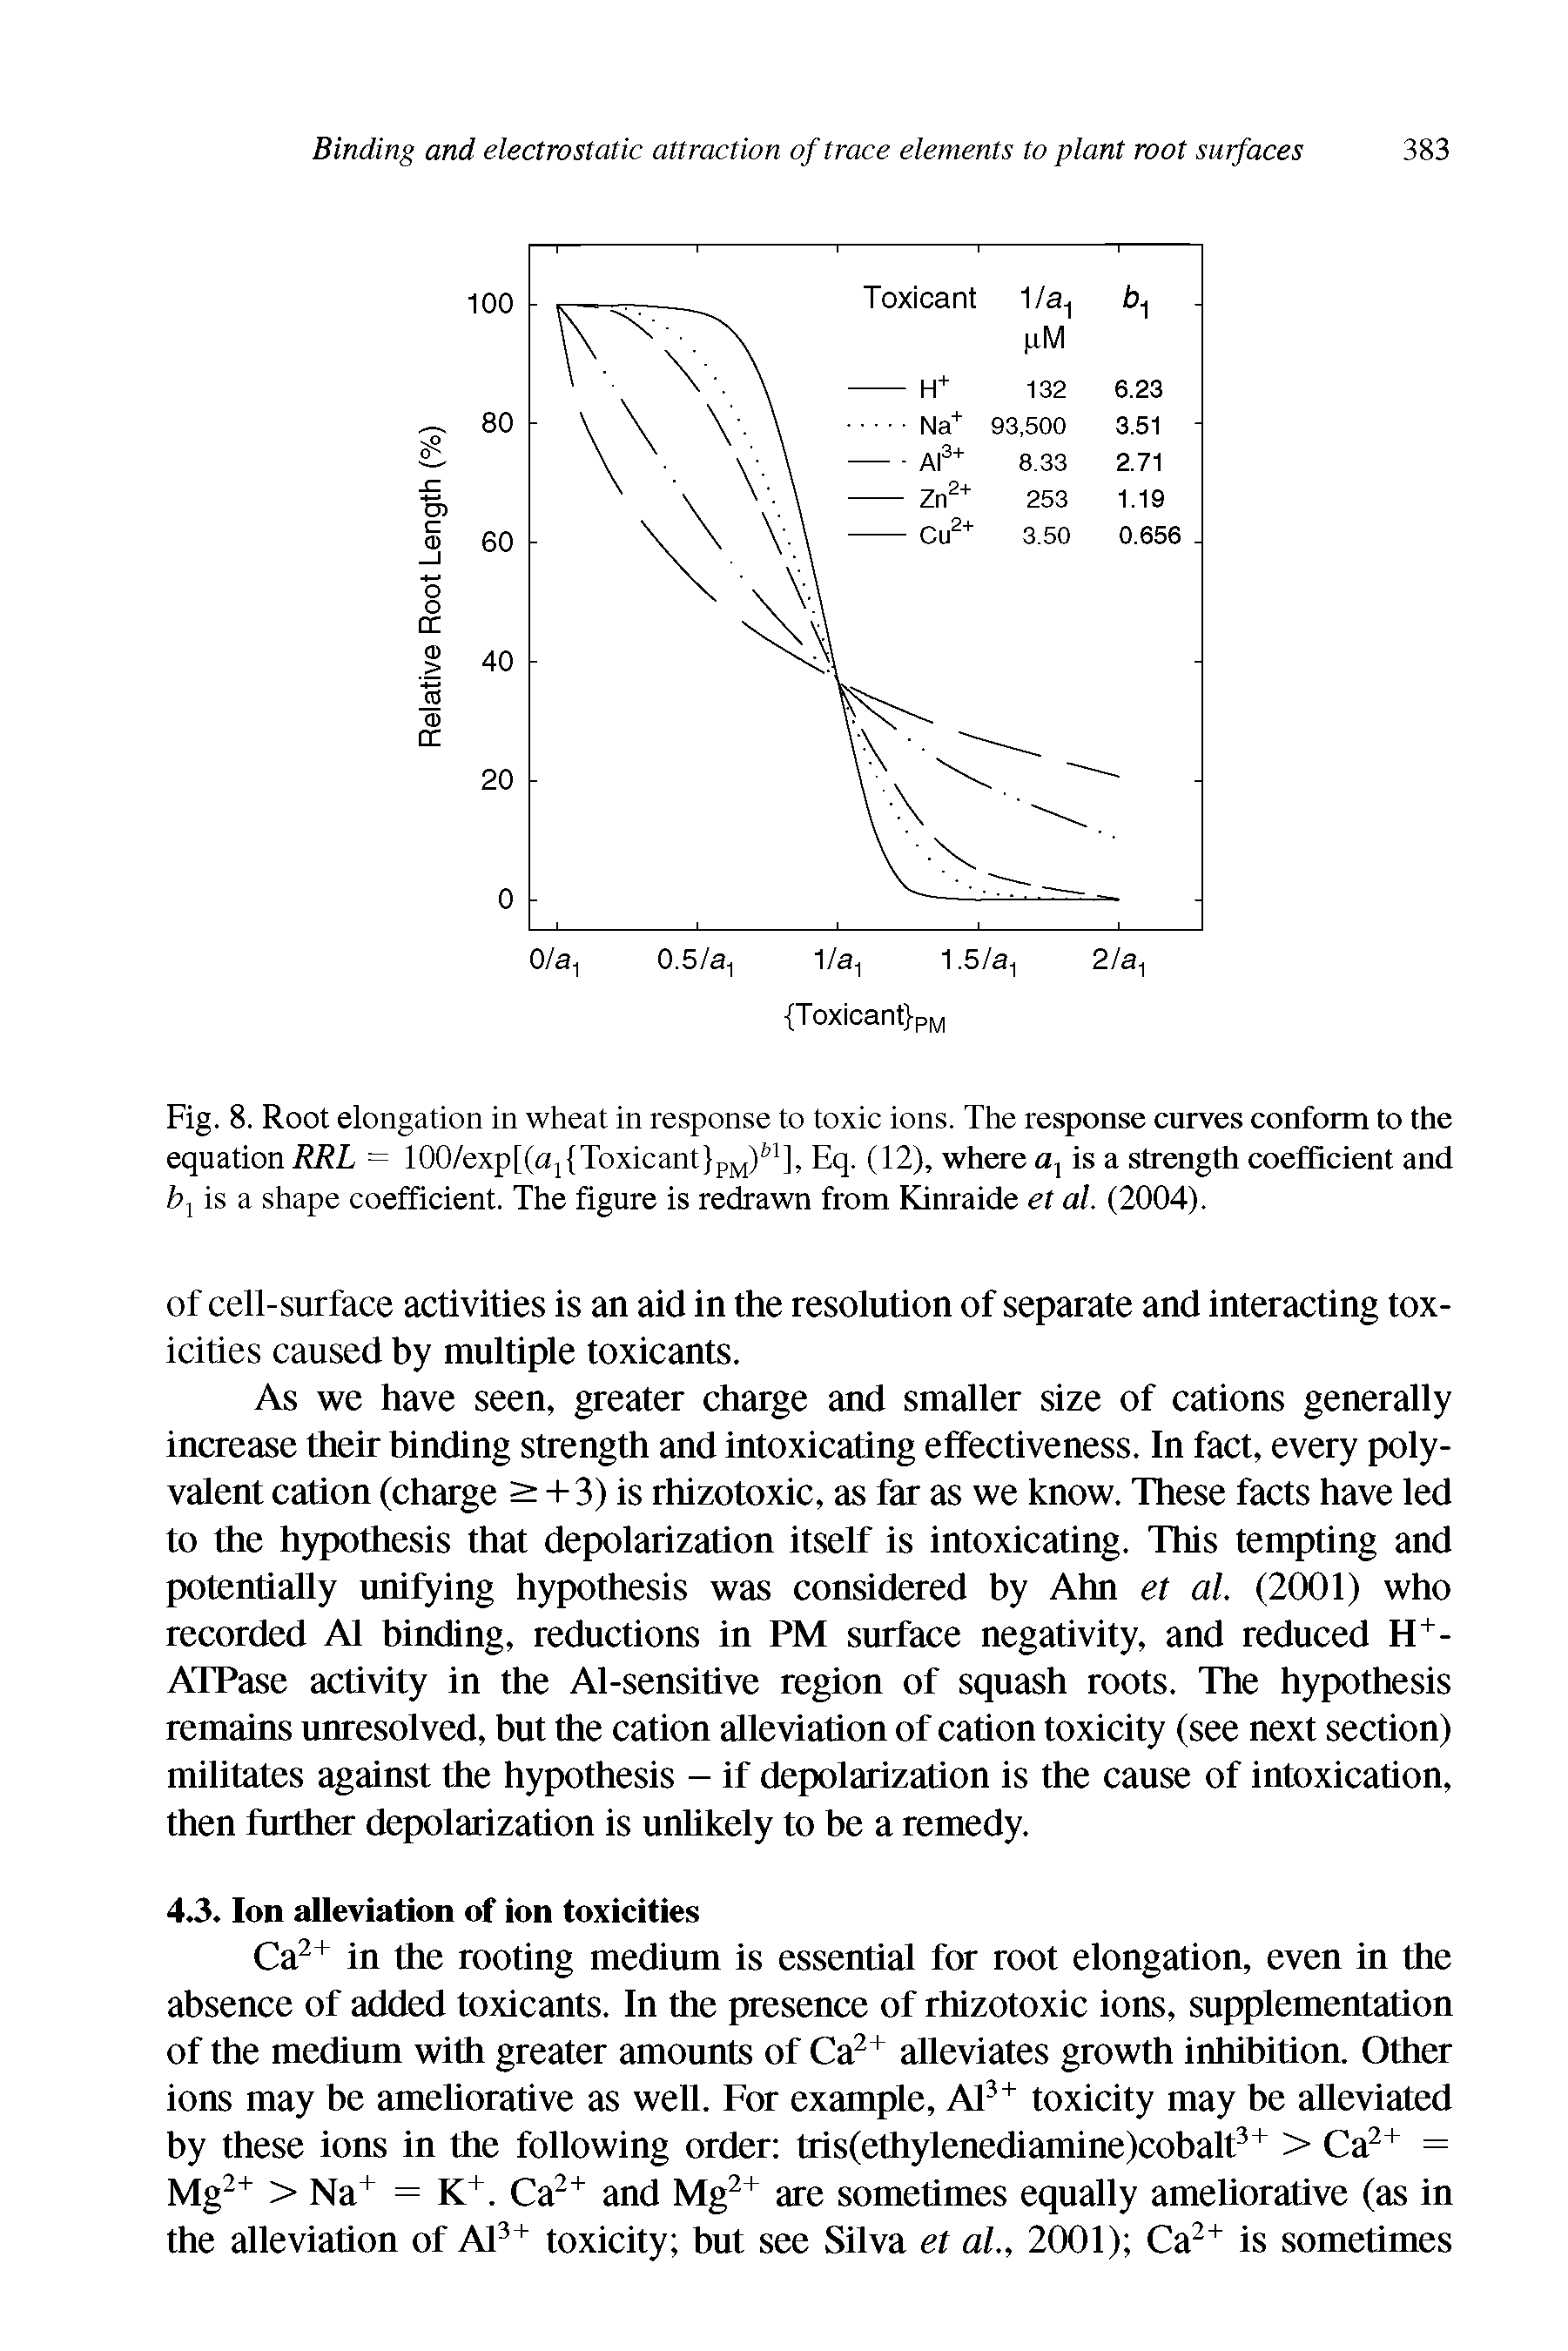 Fig. 8. Root elongation in wheat in response to toxic ions. The response curves conform to the equation RRL = 100/exp[(cij Toxicant p,y[) ], Eq. (12), where a, is a strength coefficient and foj is a shape coefficient. The figure is redrawn from Kinraide et al. (2004).